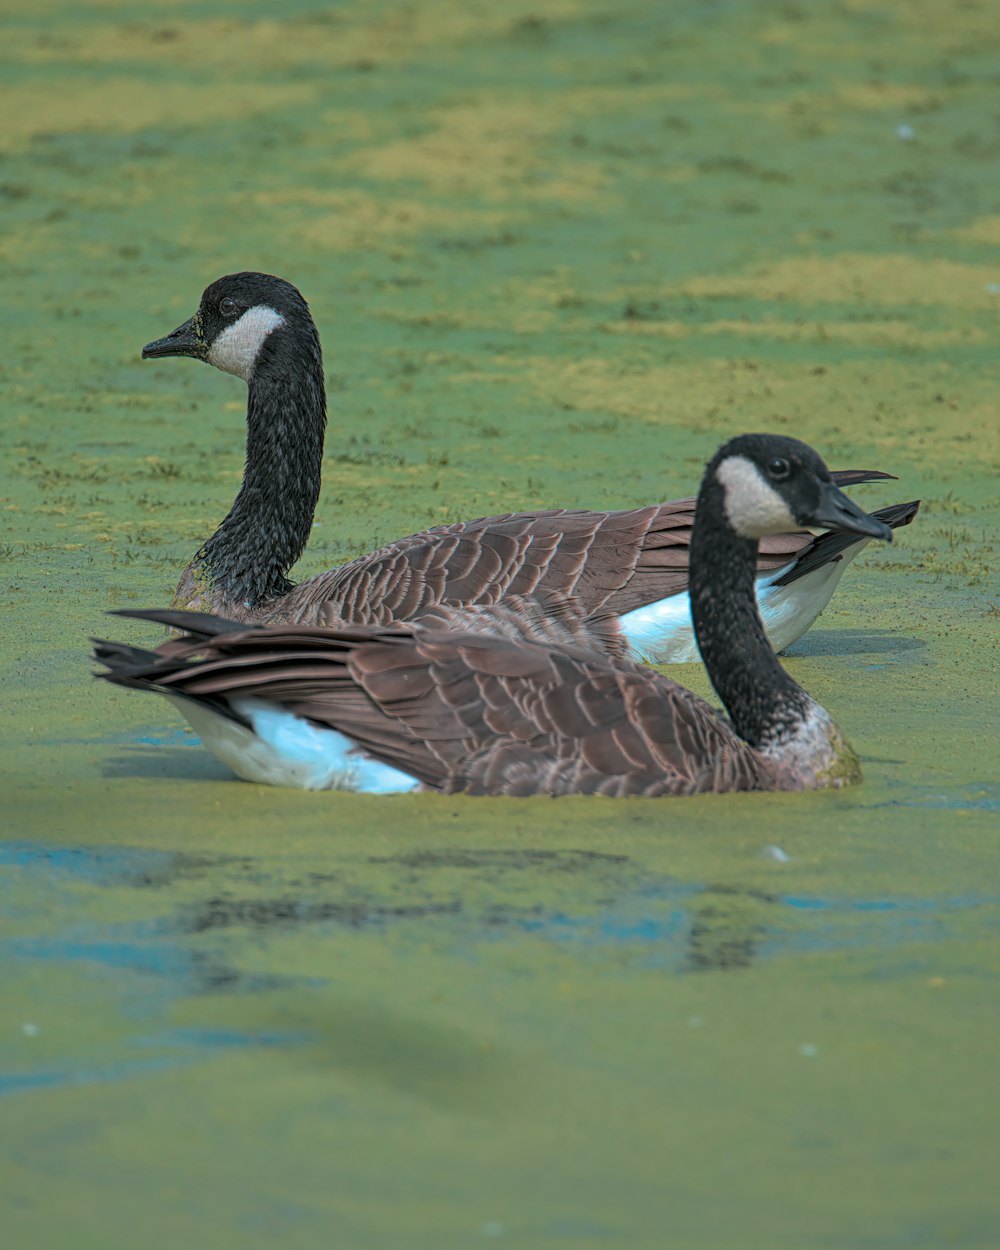 brown and black duck on water during daytime